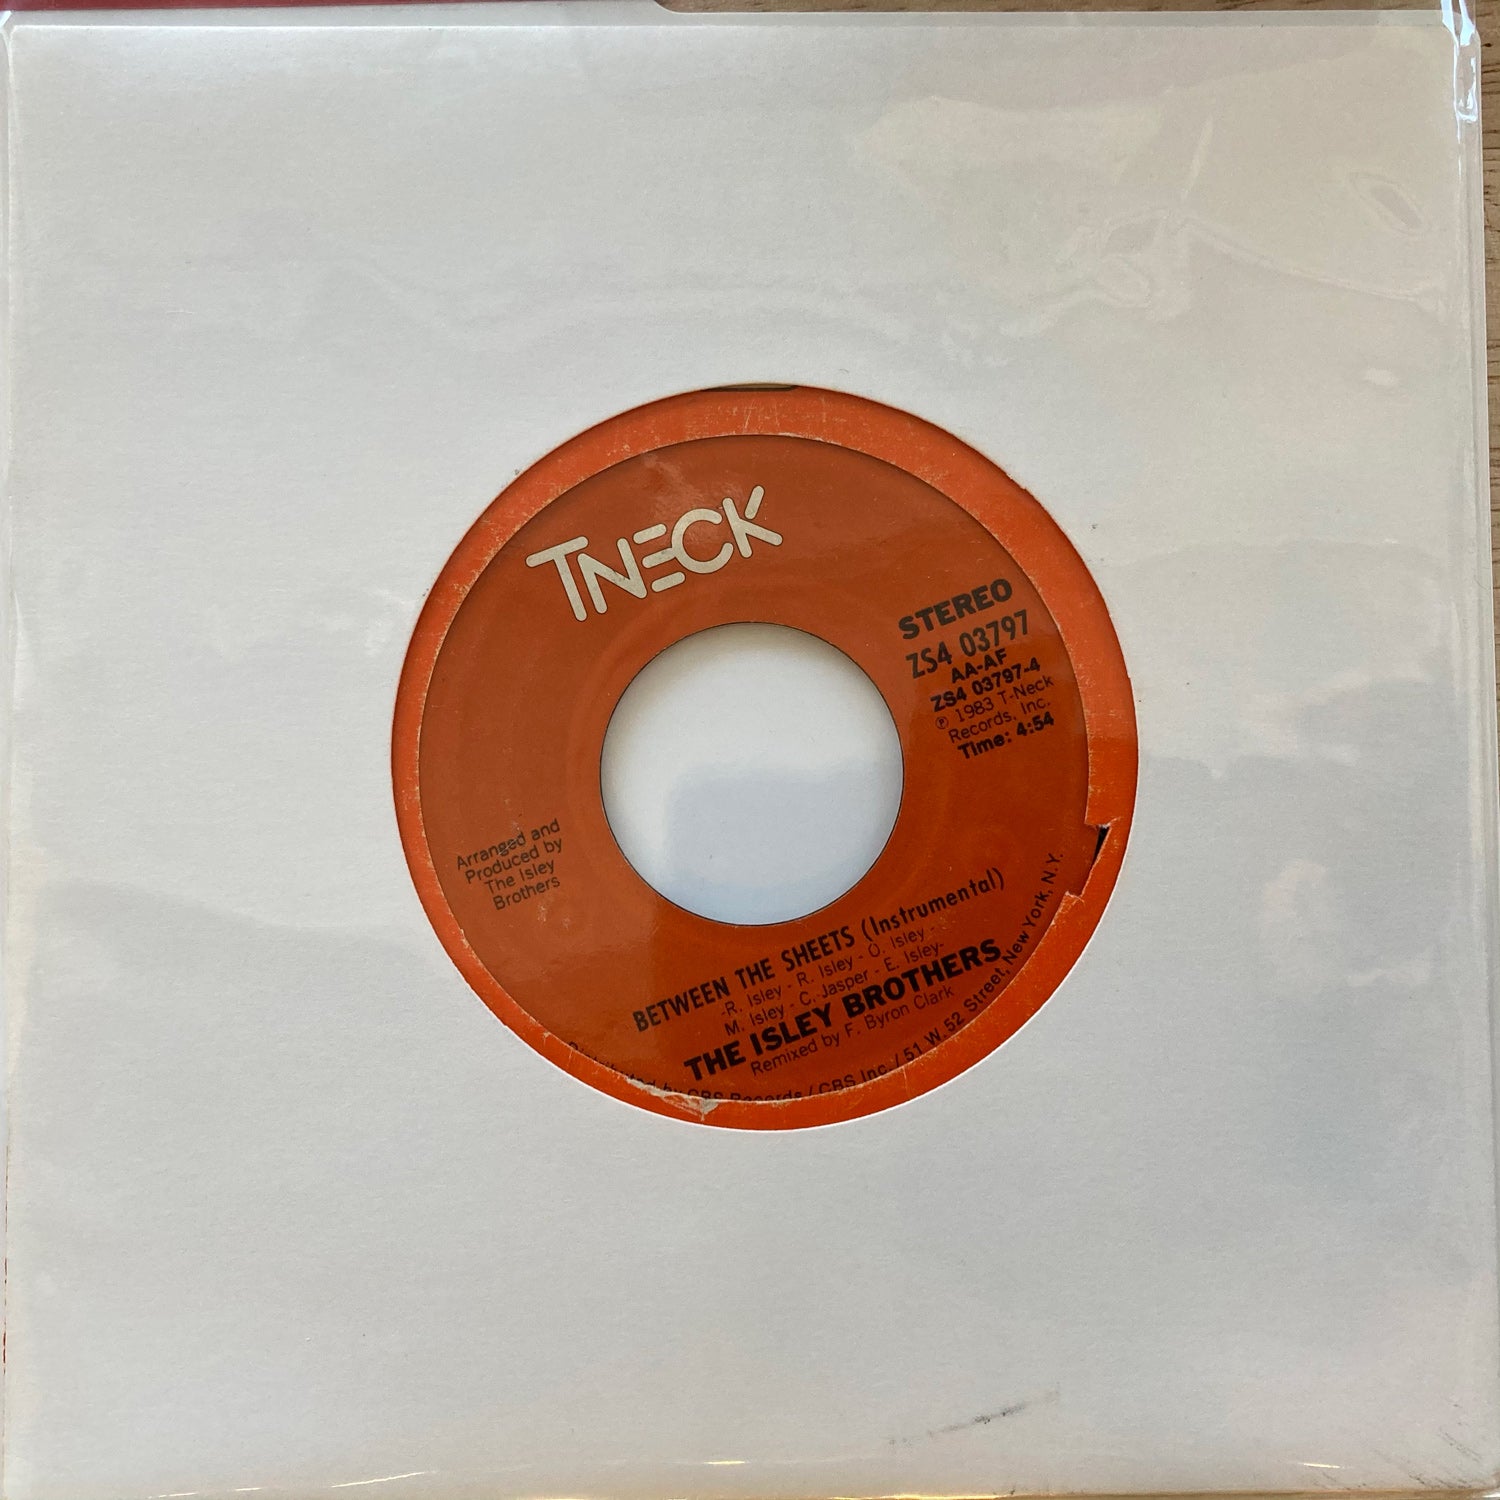 Isley Brothers - Between The Sheets / Instrumental (7")